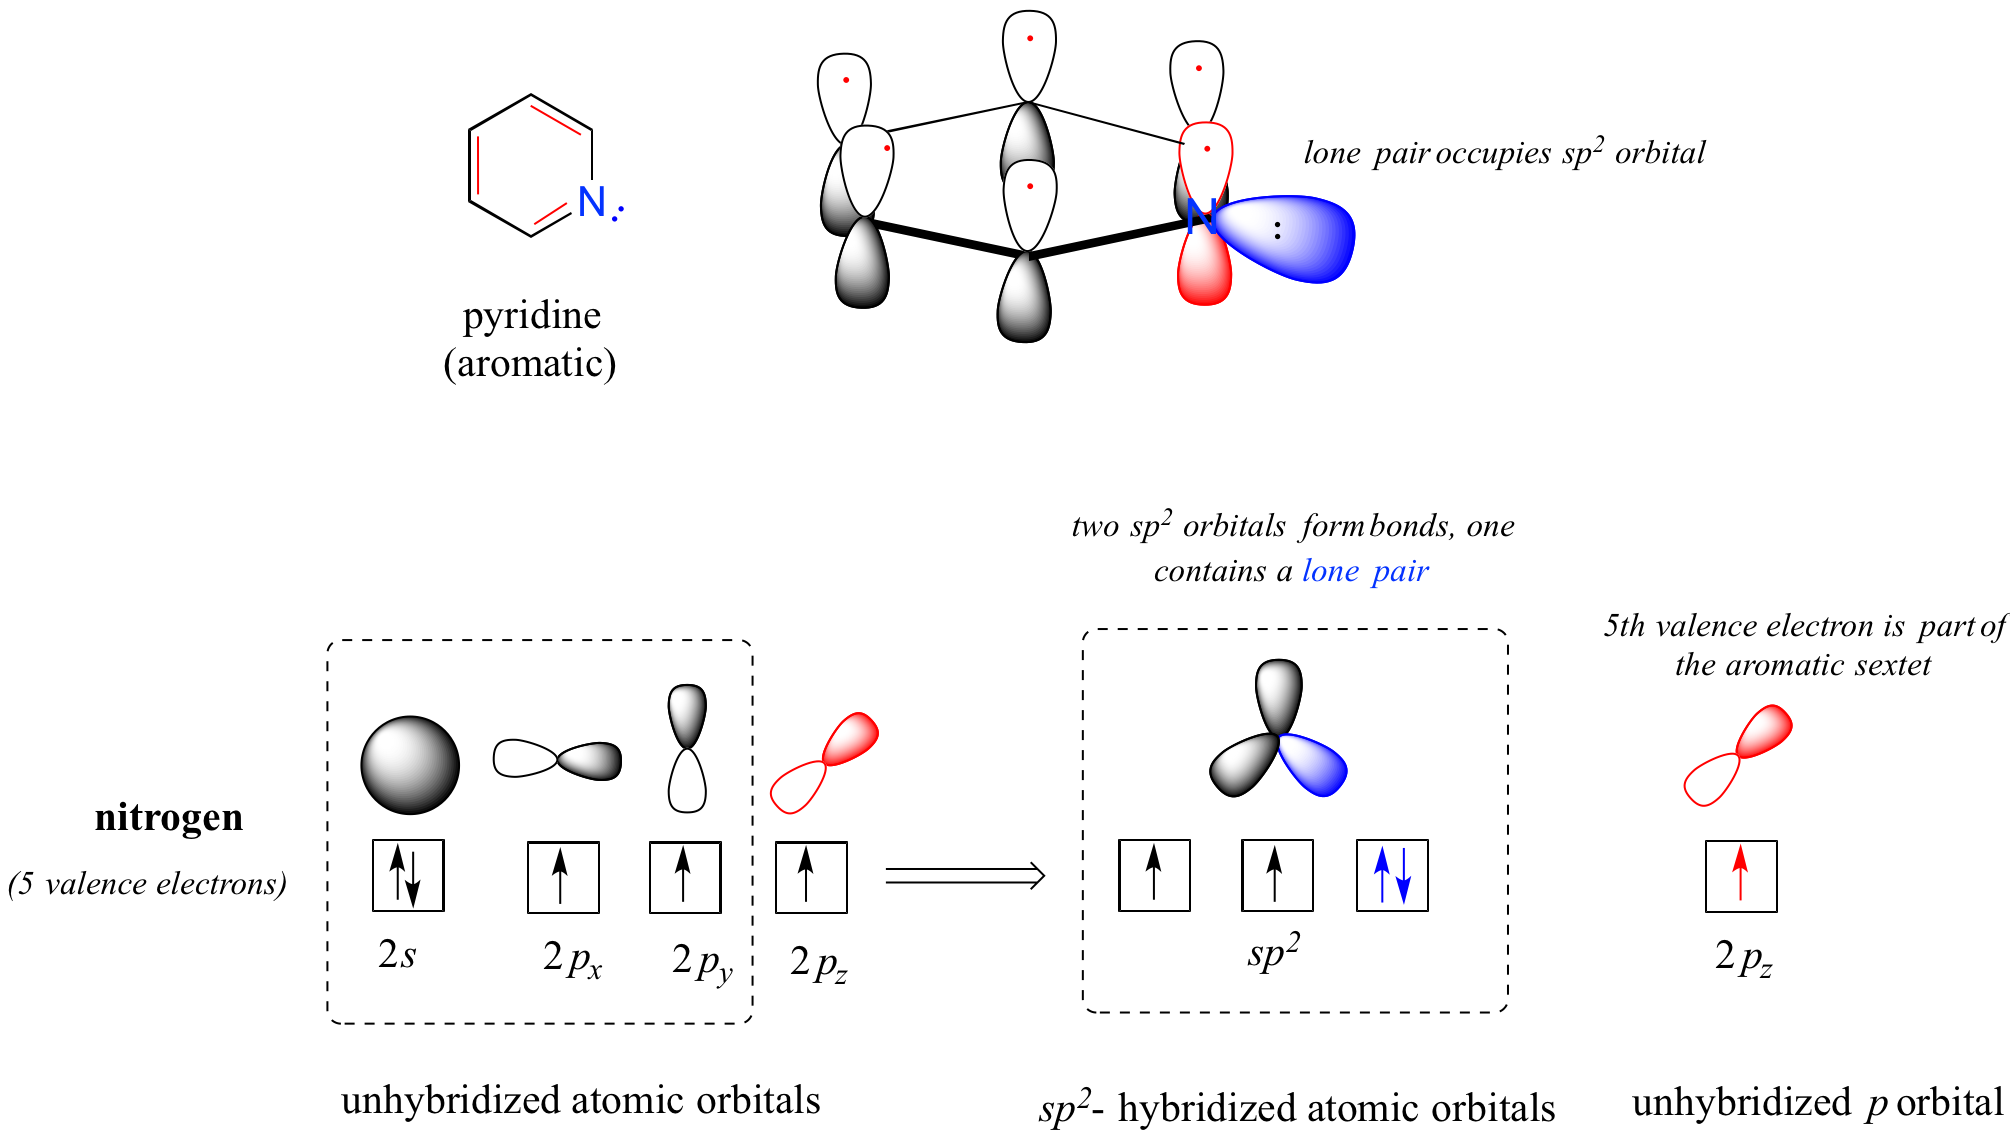 The nitrogen in pyridine has a full 2 s orbital and three unpaired electrons in the 2 p orbital. After hybridizing, the nitrogen has one lone paire and two unpaired electrons in the s p 2 orbital and one unpaired electron in the unhybridized p orbital 